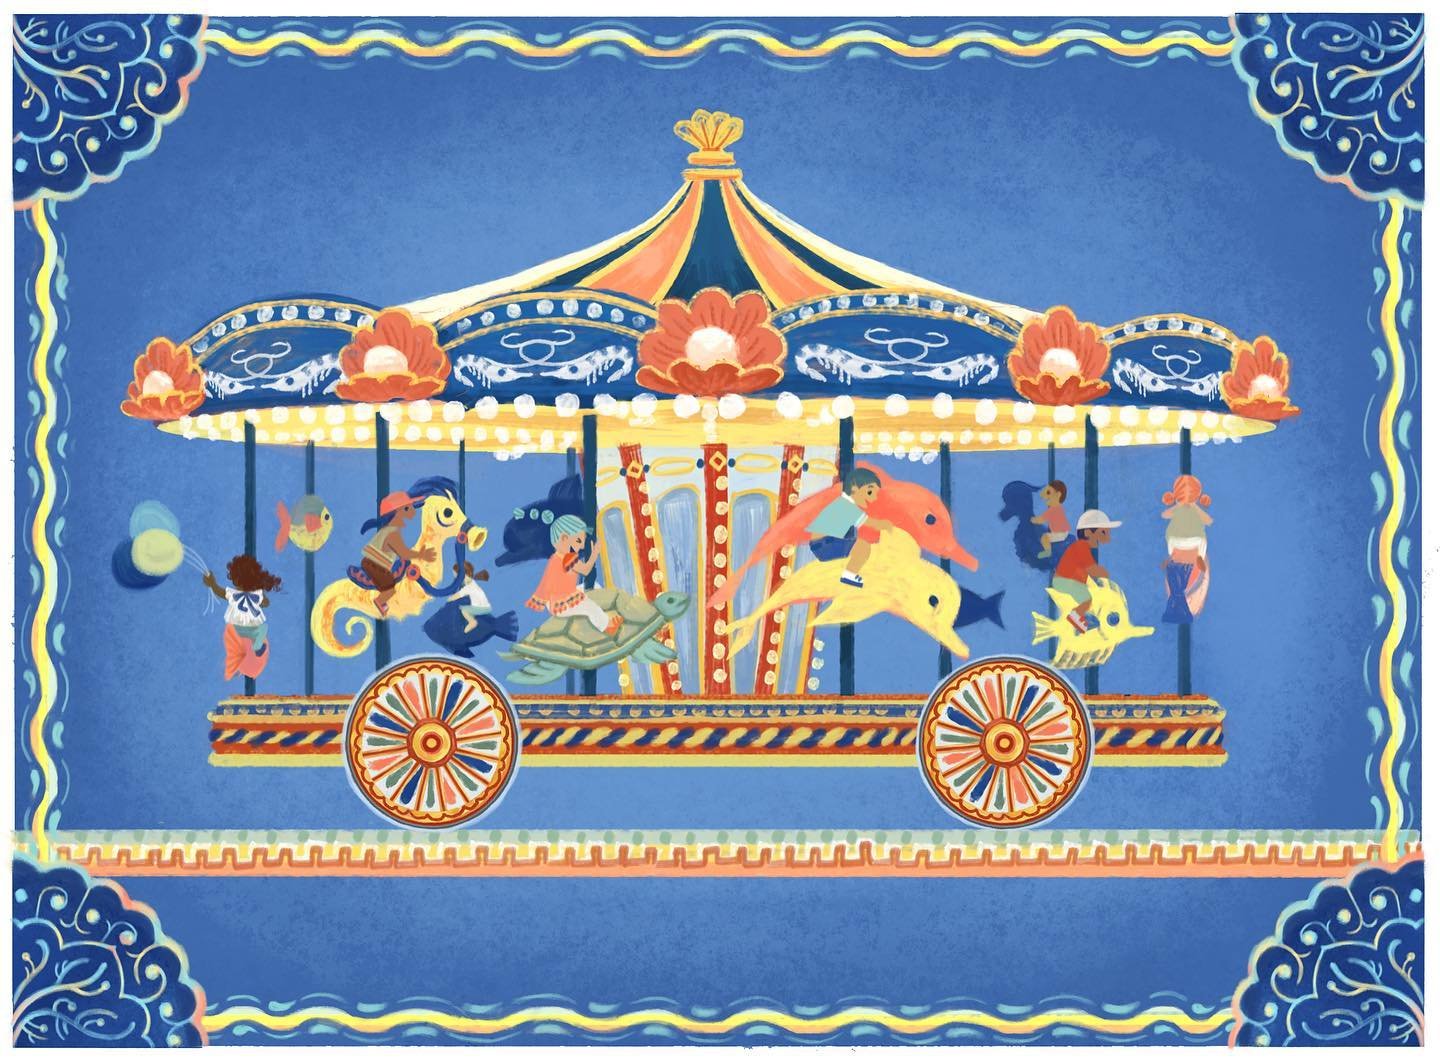 Step into the enchanting world of August with ocean carousel-themed calendar 🌊🎠 Royal blue has been my theme color of the year. Hoping everyone is staying cool this summer!⭐️

Wallpaper link in bio🐠